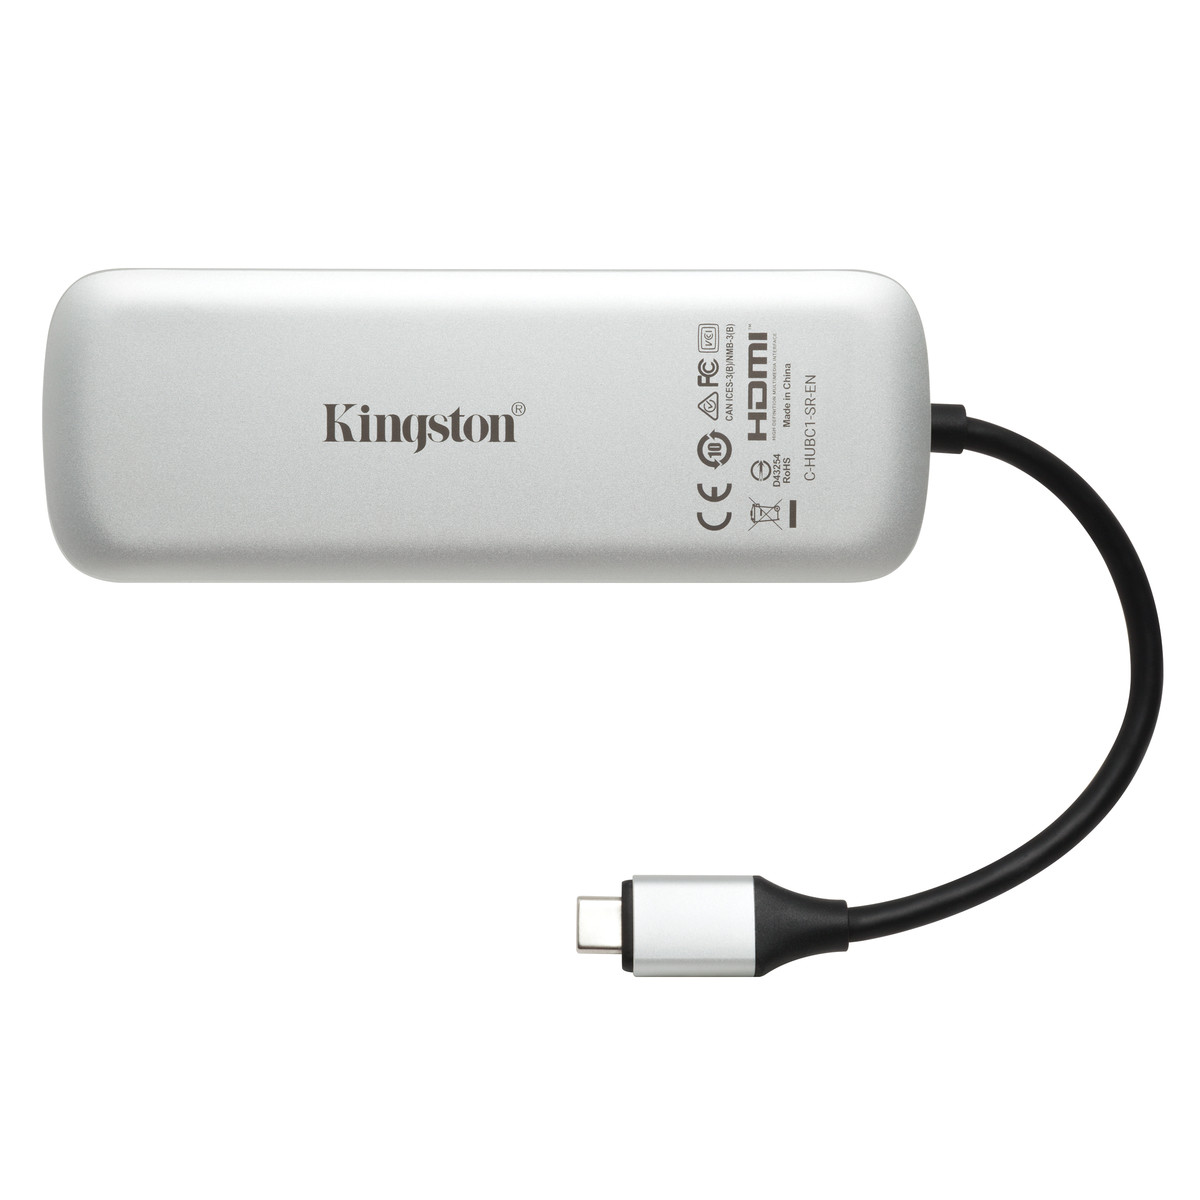 Kingston Nucleum 7-in-1 USB 3.0 Type-C Adapter Hub, 4K HDMI, SD and MicroSD Card, USB Type-C Charging for MacBook, Chromebook, and Other USB Type-C devices - image 2 of 2